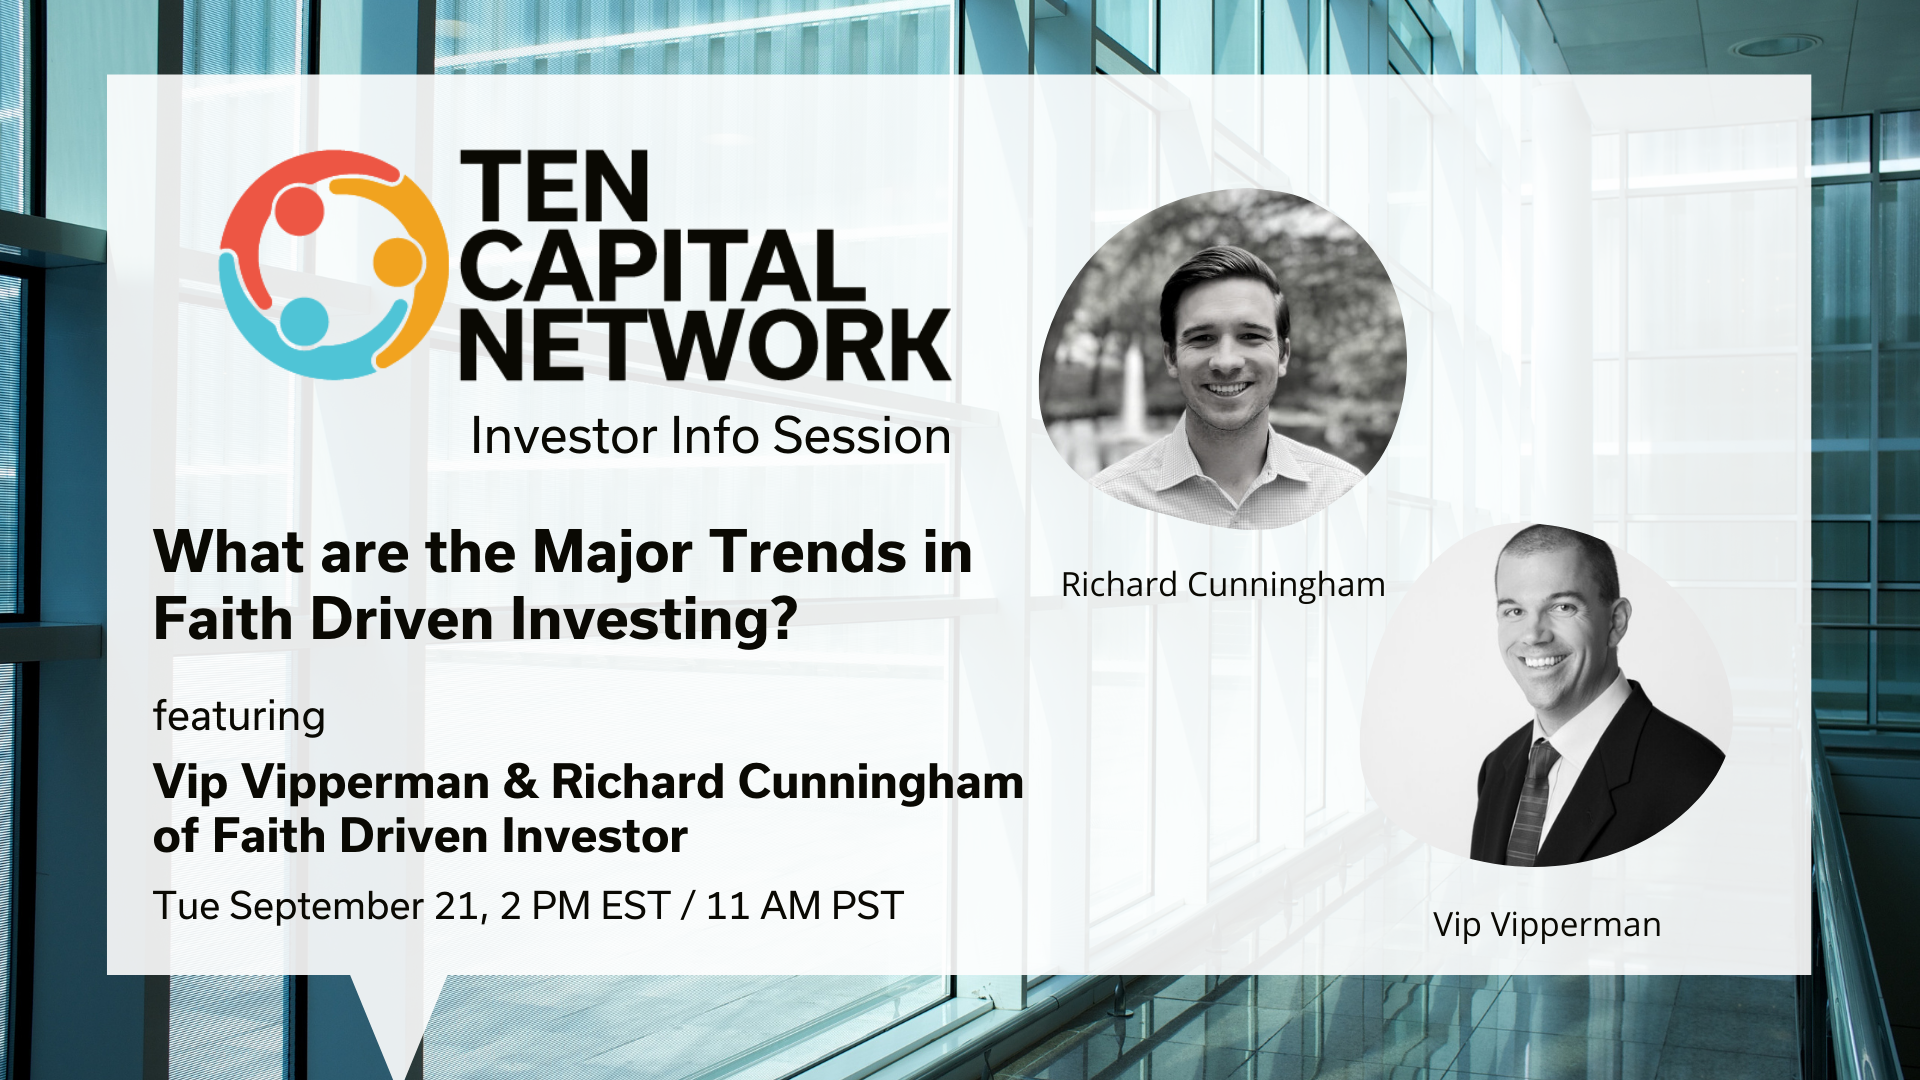 TEN Capital Investor Info Session: What are the Major Trends in Faith Driven Investing? With Vip Vipperman & Richard Cunningham of Faith Driven Investor